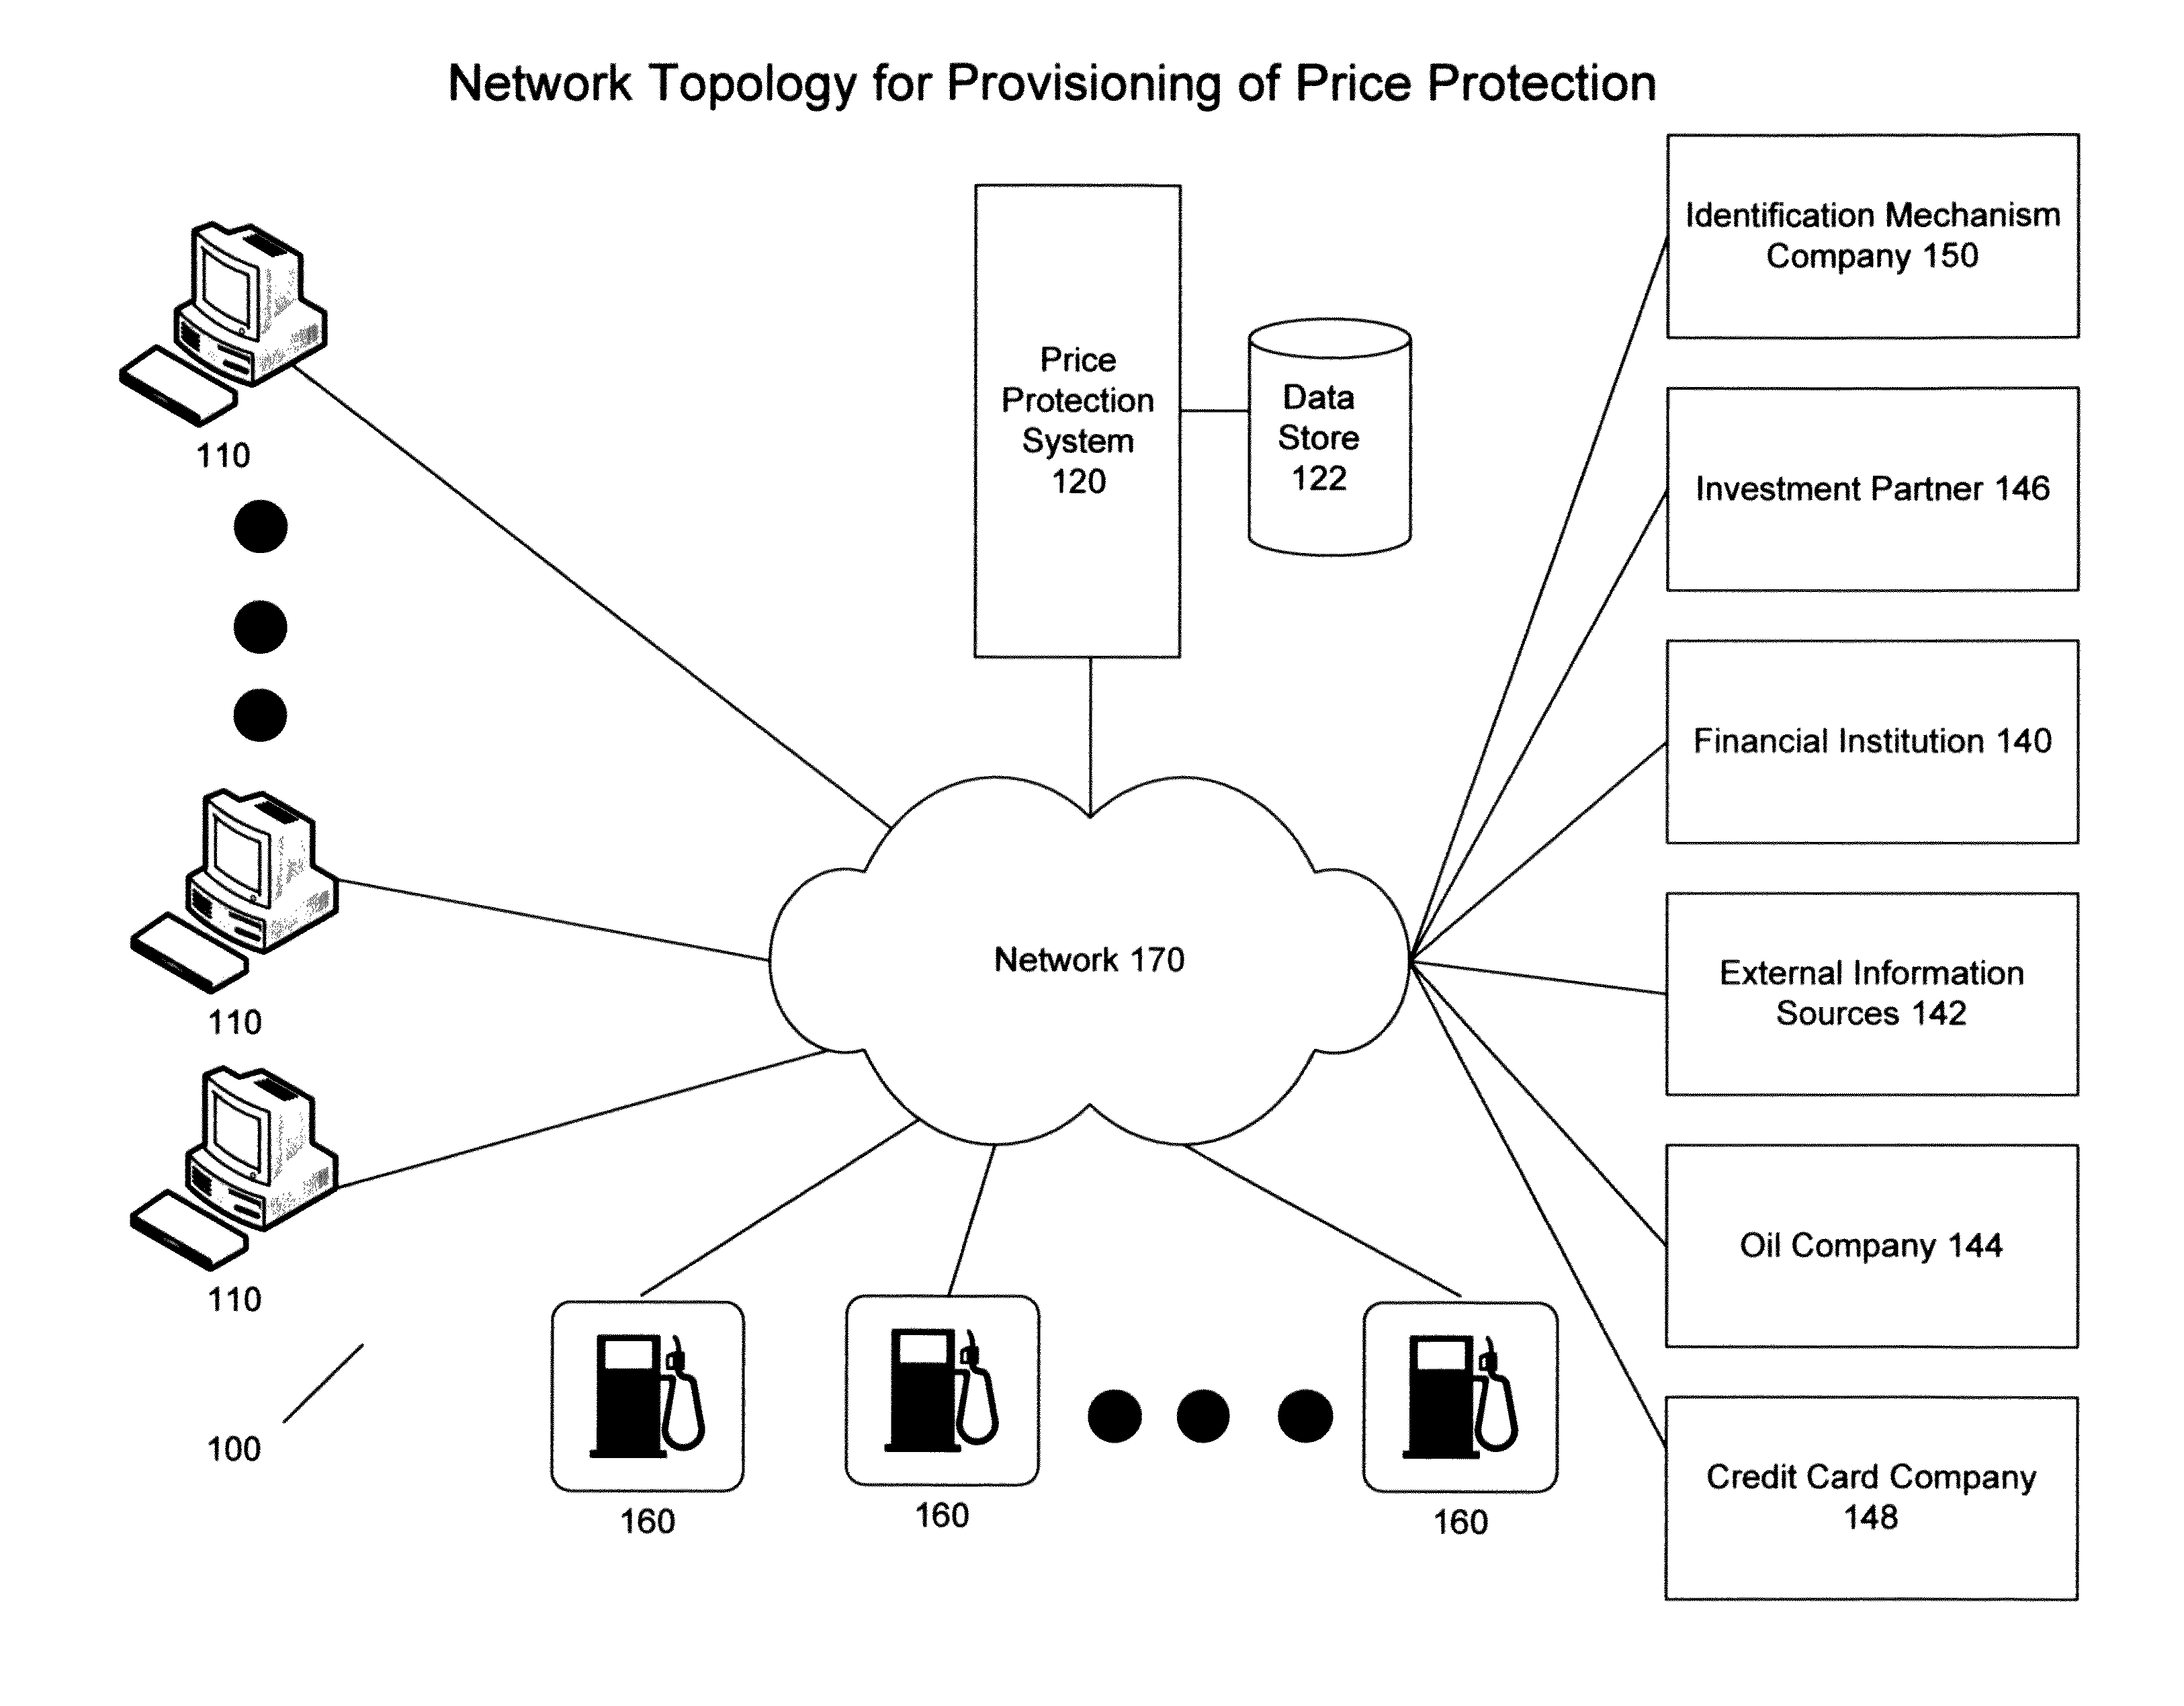 Method and system for providing price protection for commodity purchasing through price protection contracts